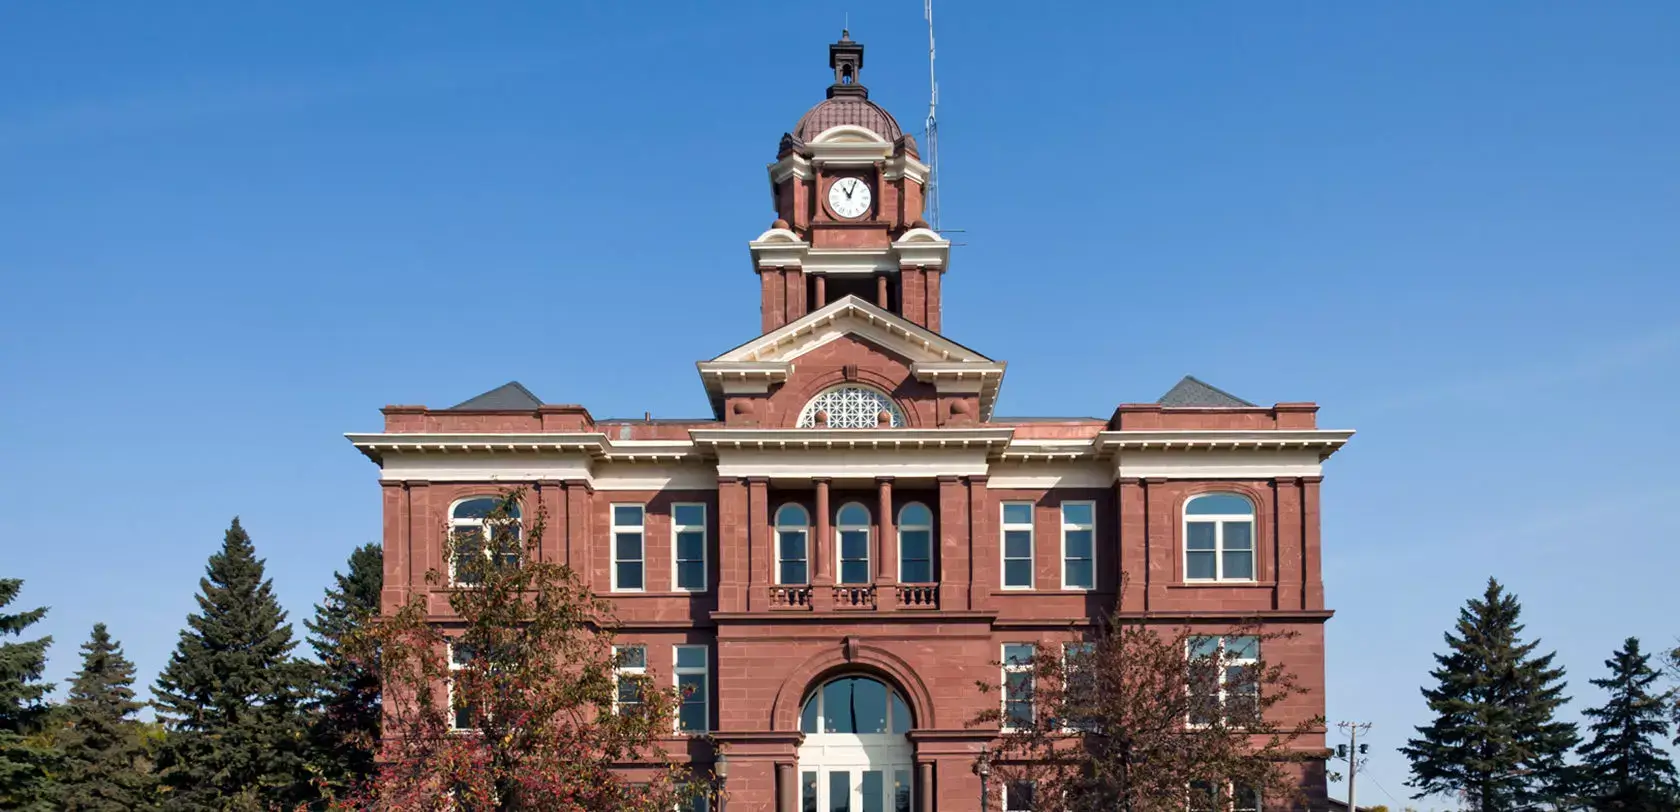 Grant County Courthouse building